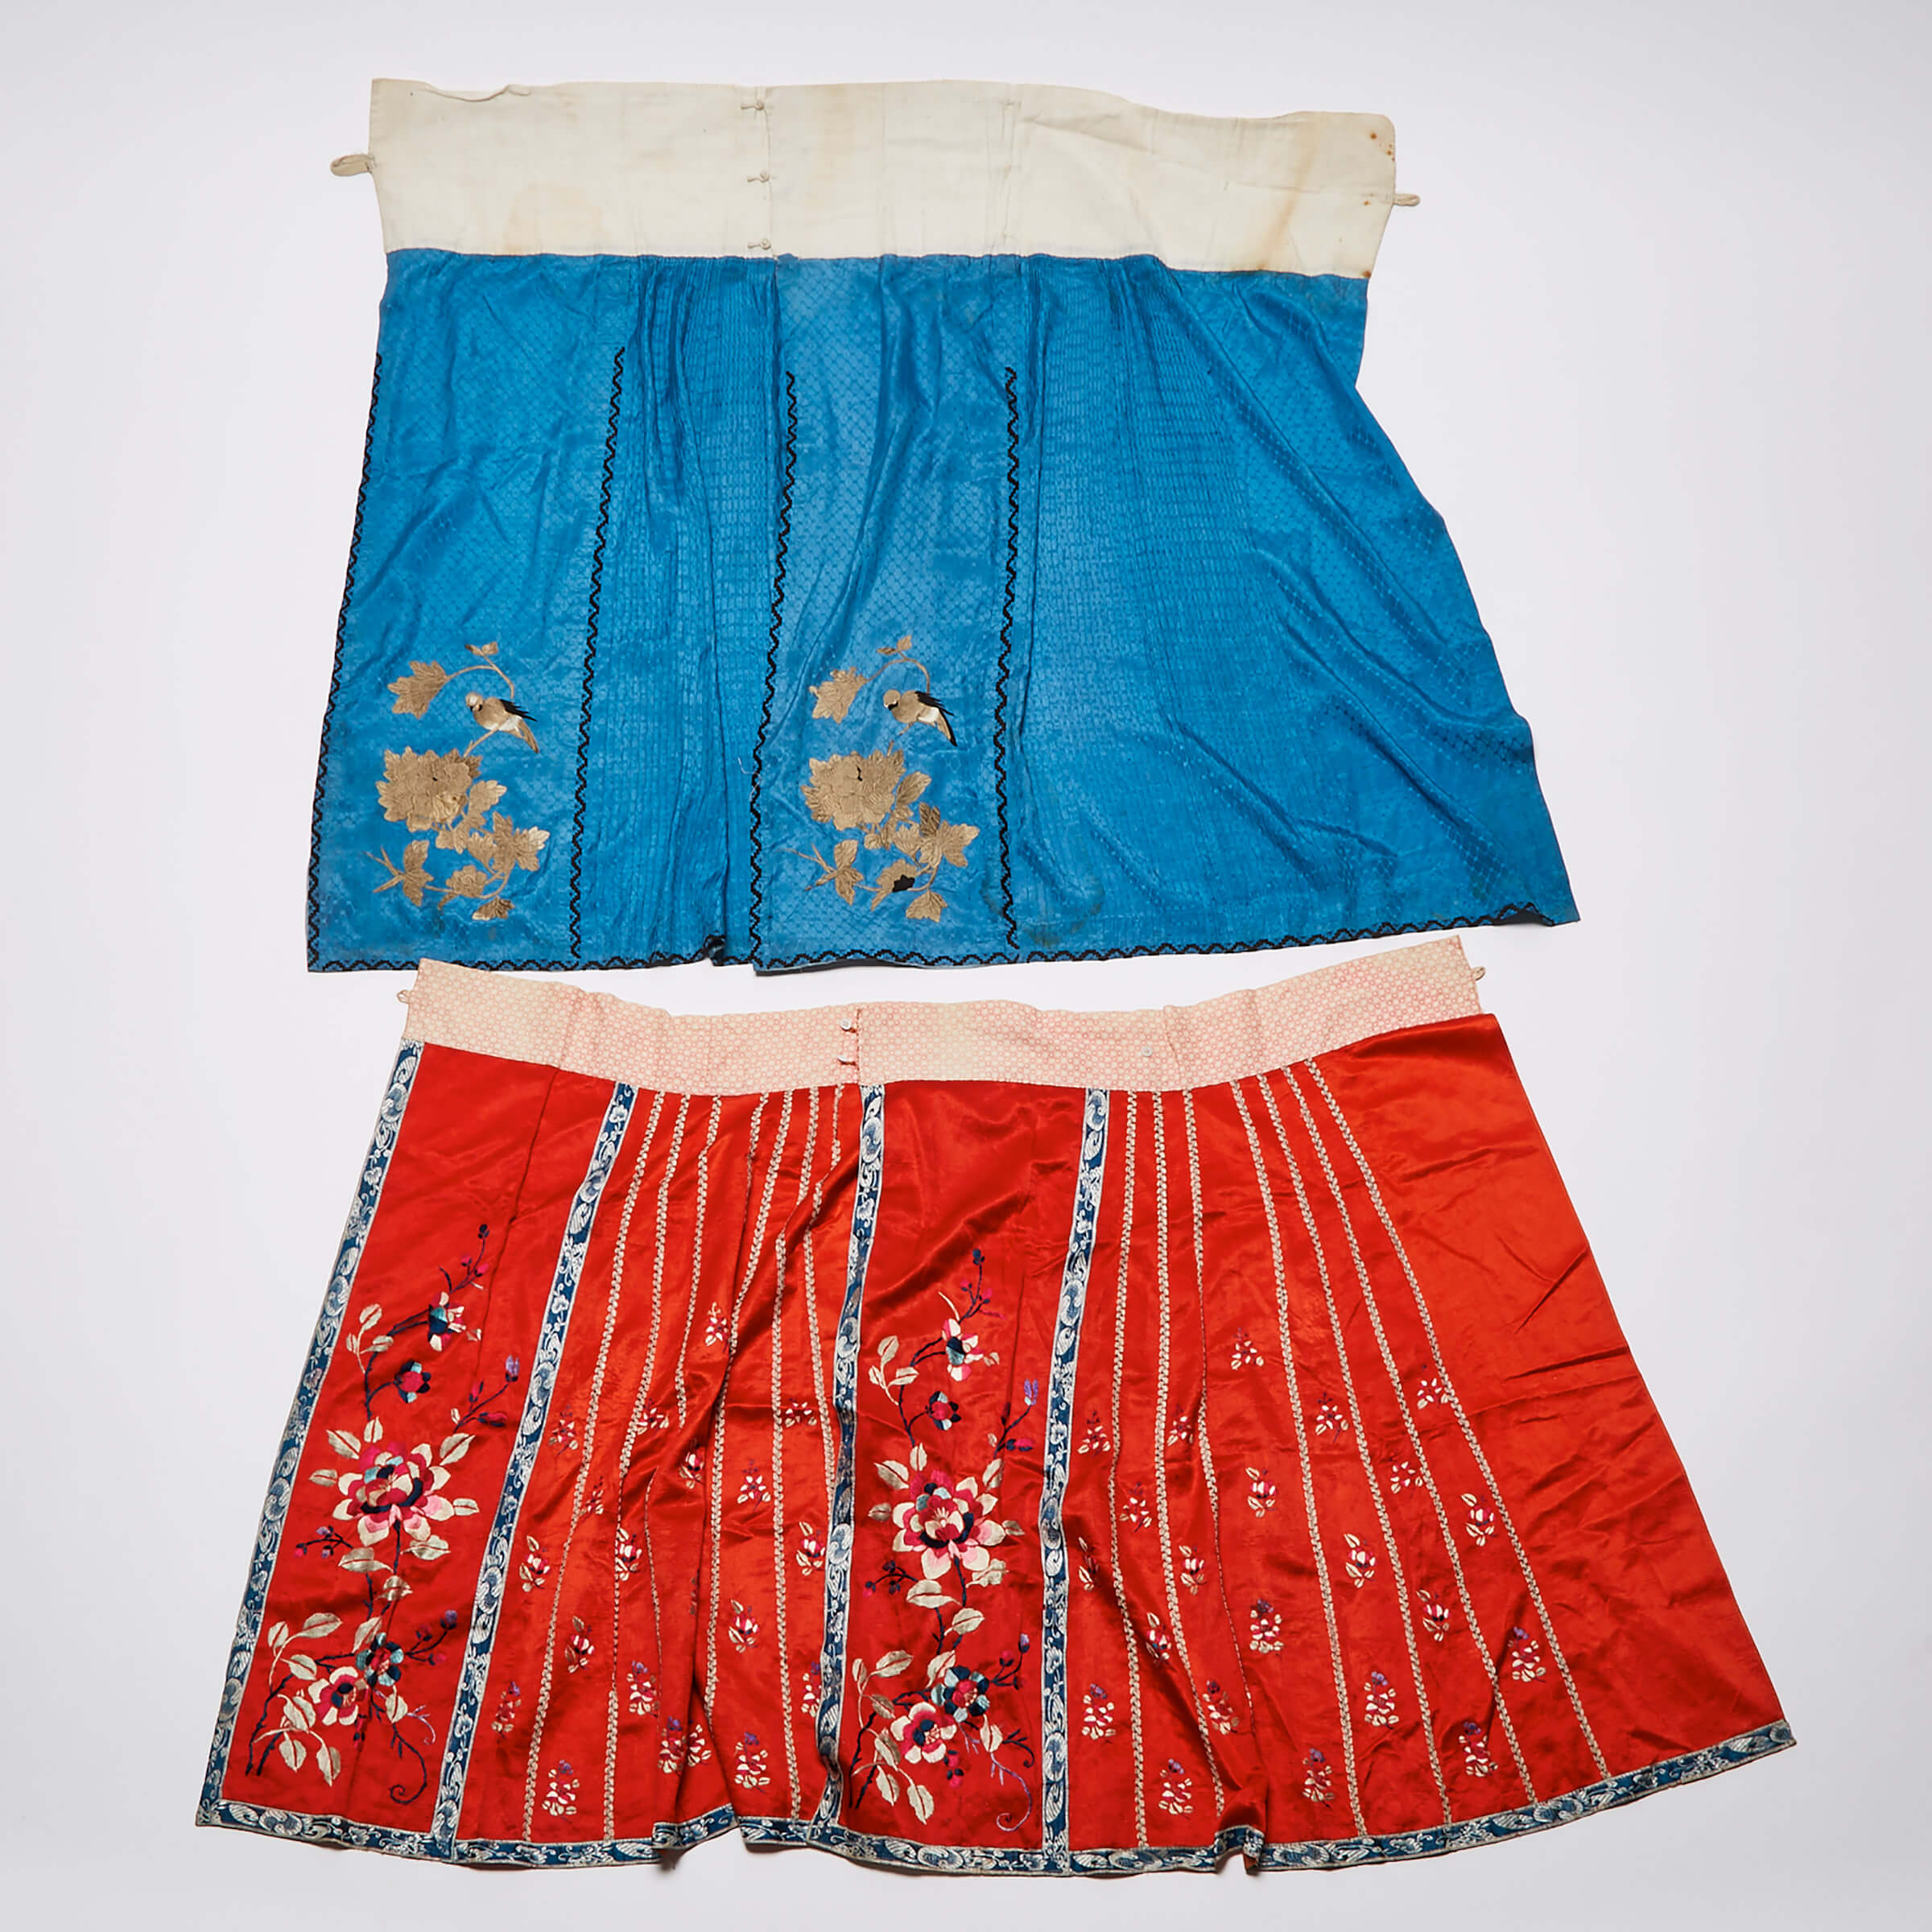 Two Chinese Embroidered Pleated Skirts